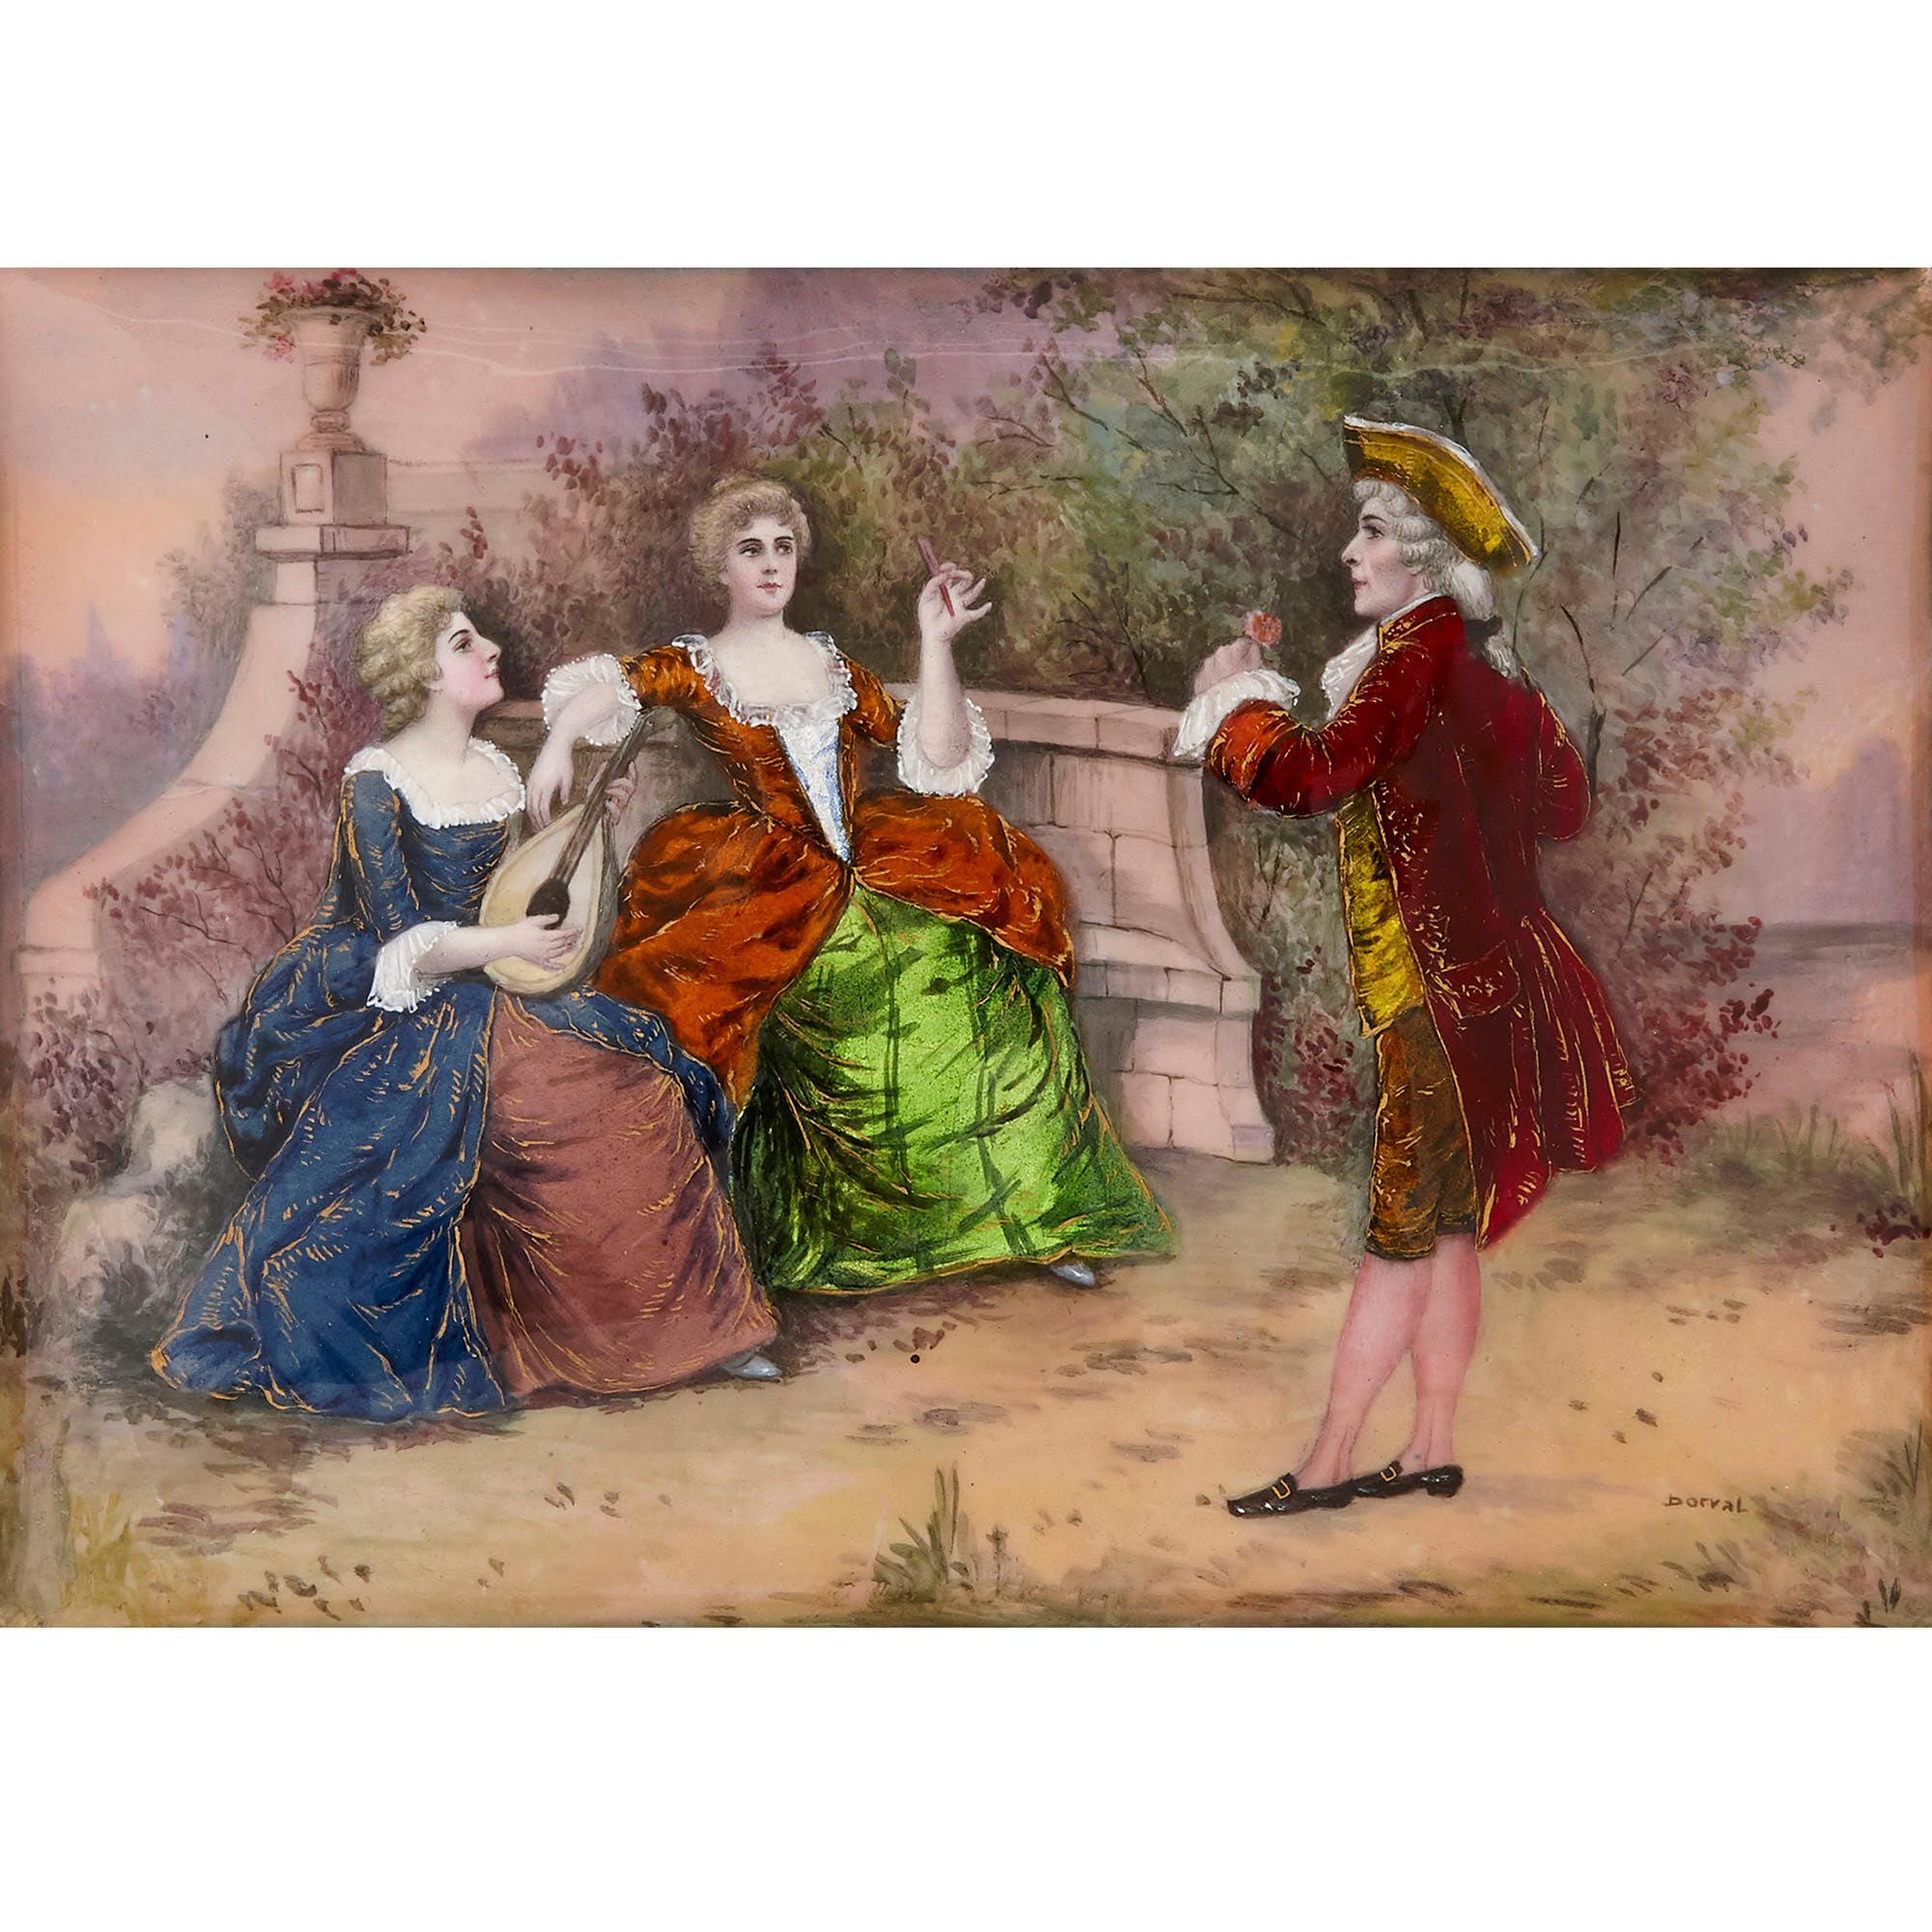 Antique Limoges enamel plaque of a fête galante
French, late 19th century
Measures: Frame: Height 27cm, width 28.5cm, depth 3cm
Plaque: Height 14cm, width 19.5cm, depth 0.5cm  

This charming Limoges enamel plaque, held by an elaborate gilt